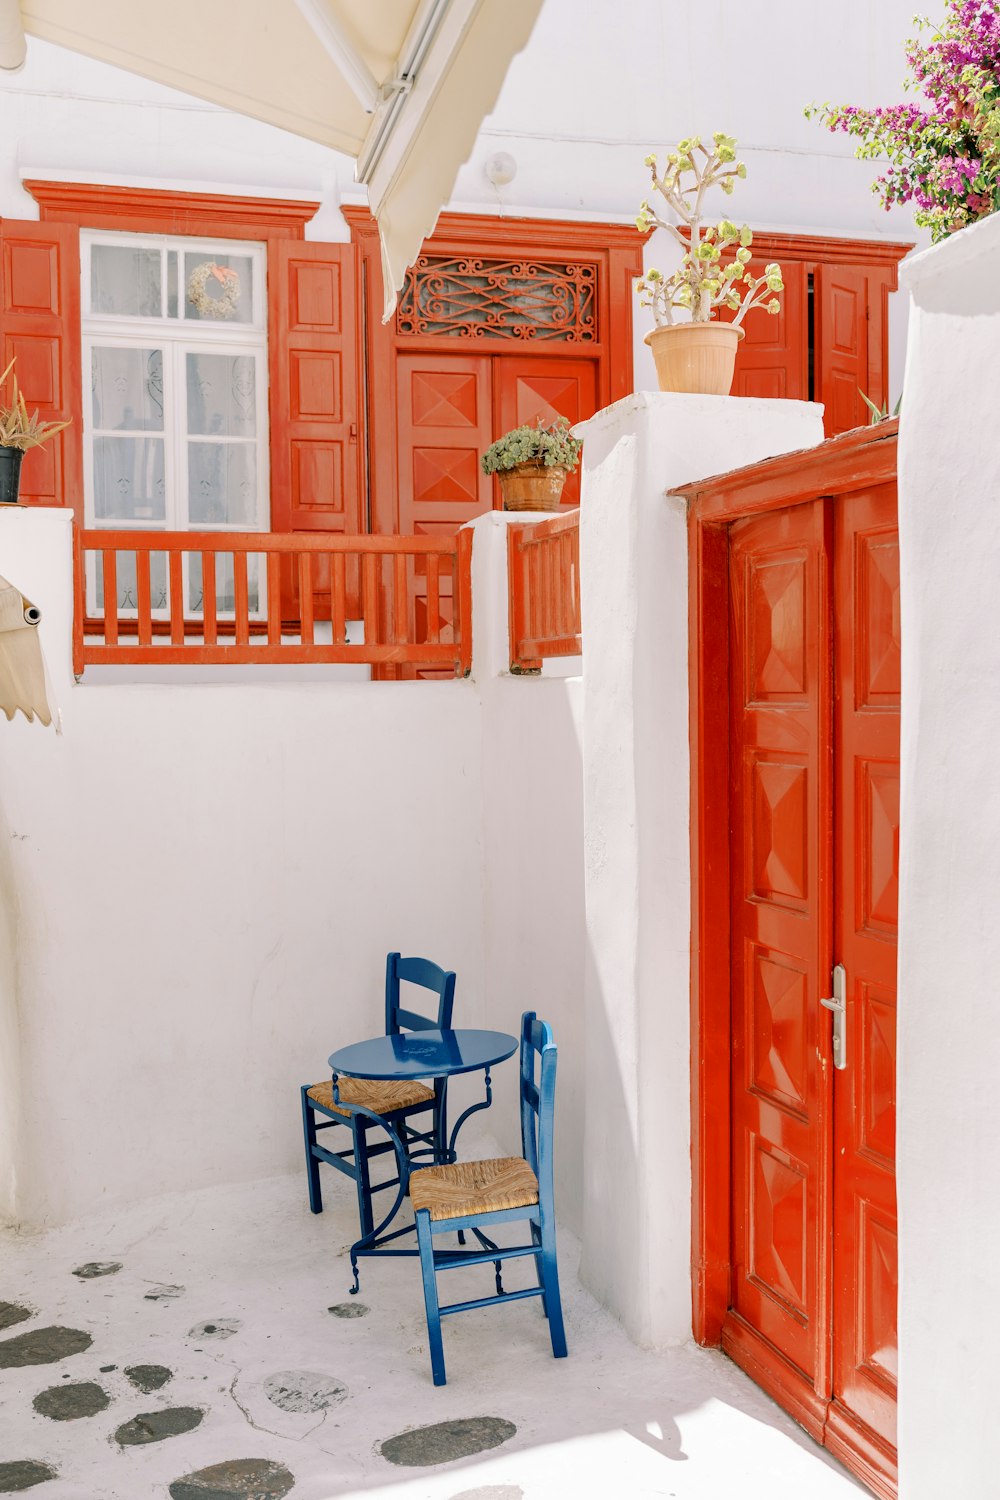 a blue chair and a blue table in front of a red door